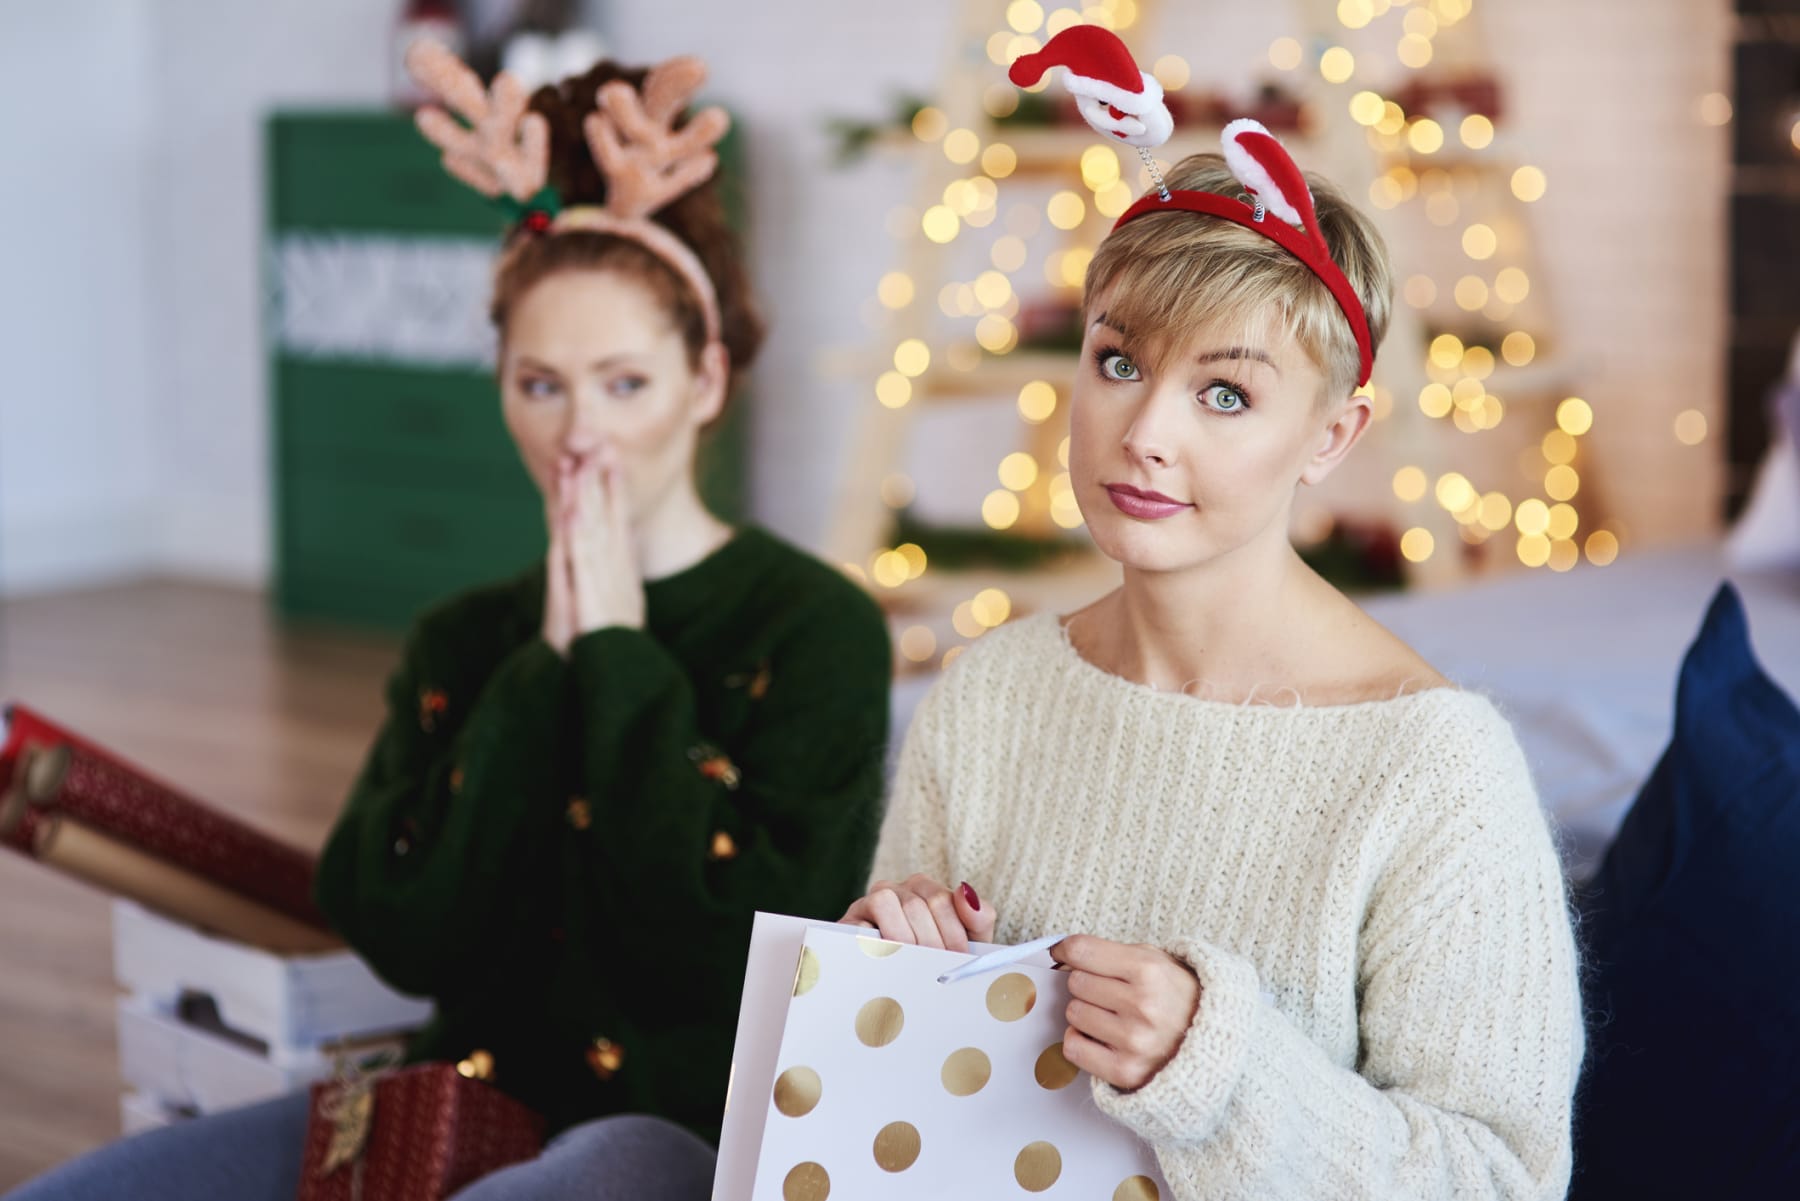 Woman looks unhappy as she opens holiday gift.